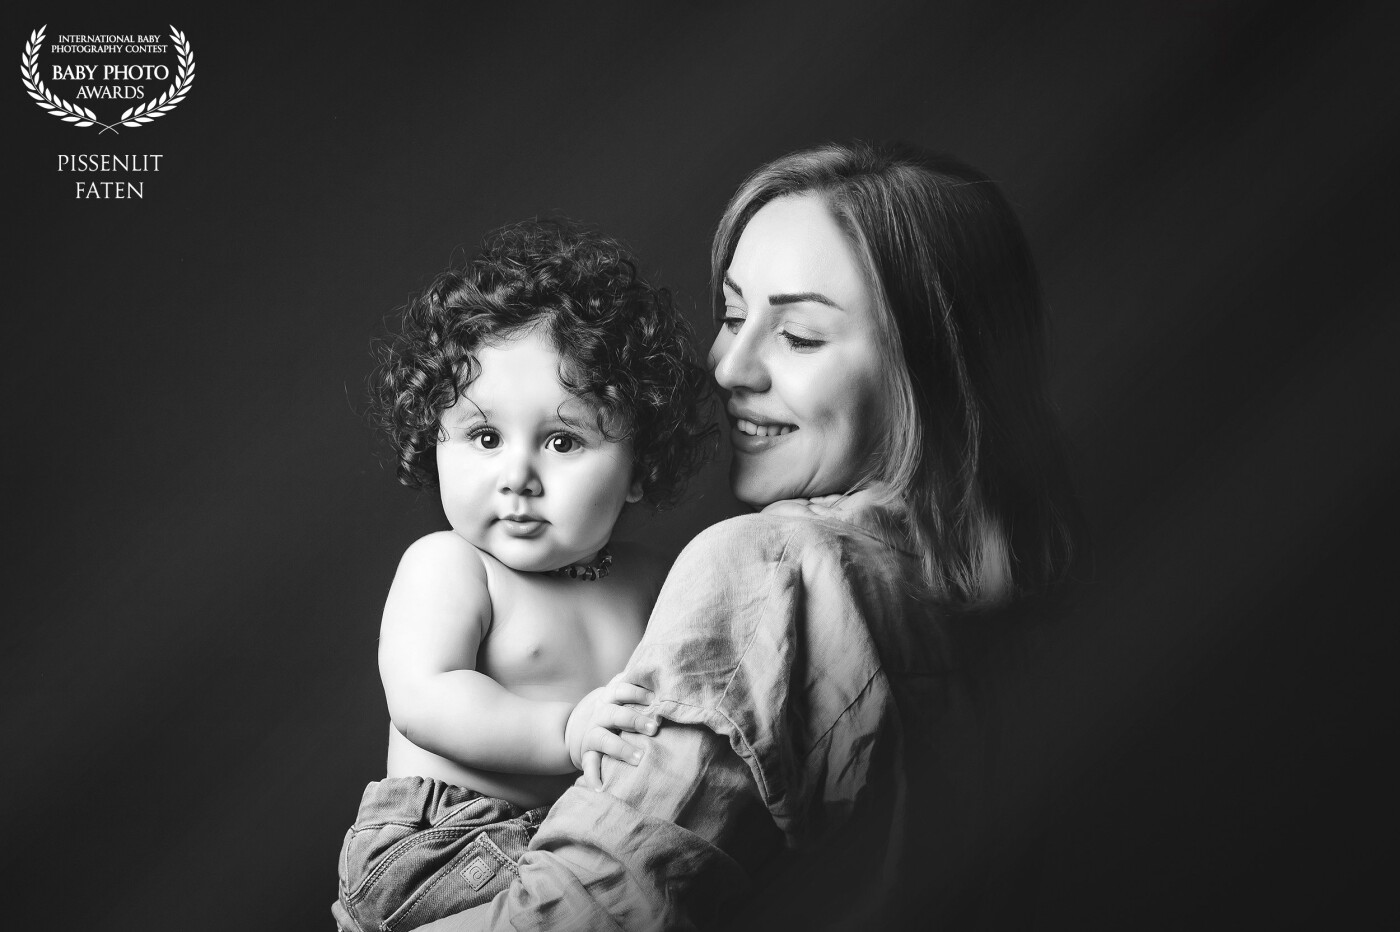 The soft way she's looking at her baby posing perfectly for me resumes all the love of a proud mum.<br />
I like this atmosphere of complicity while I'm doing my shoots.